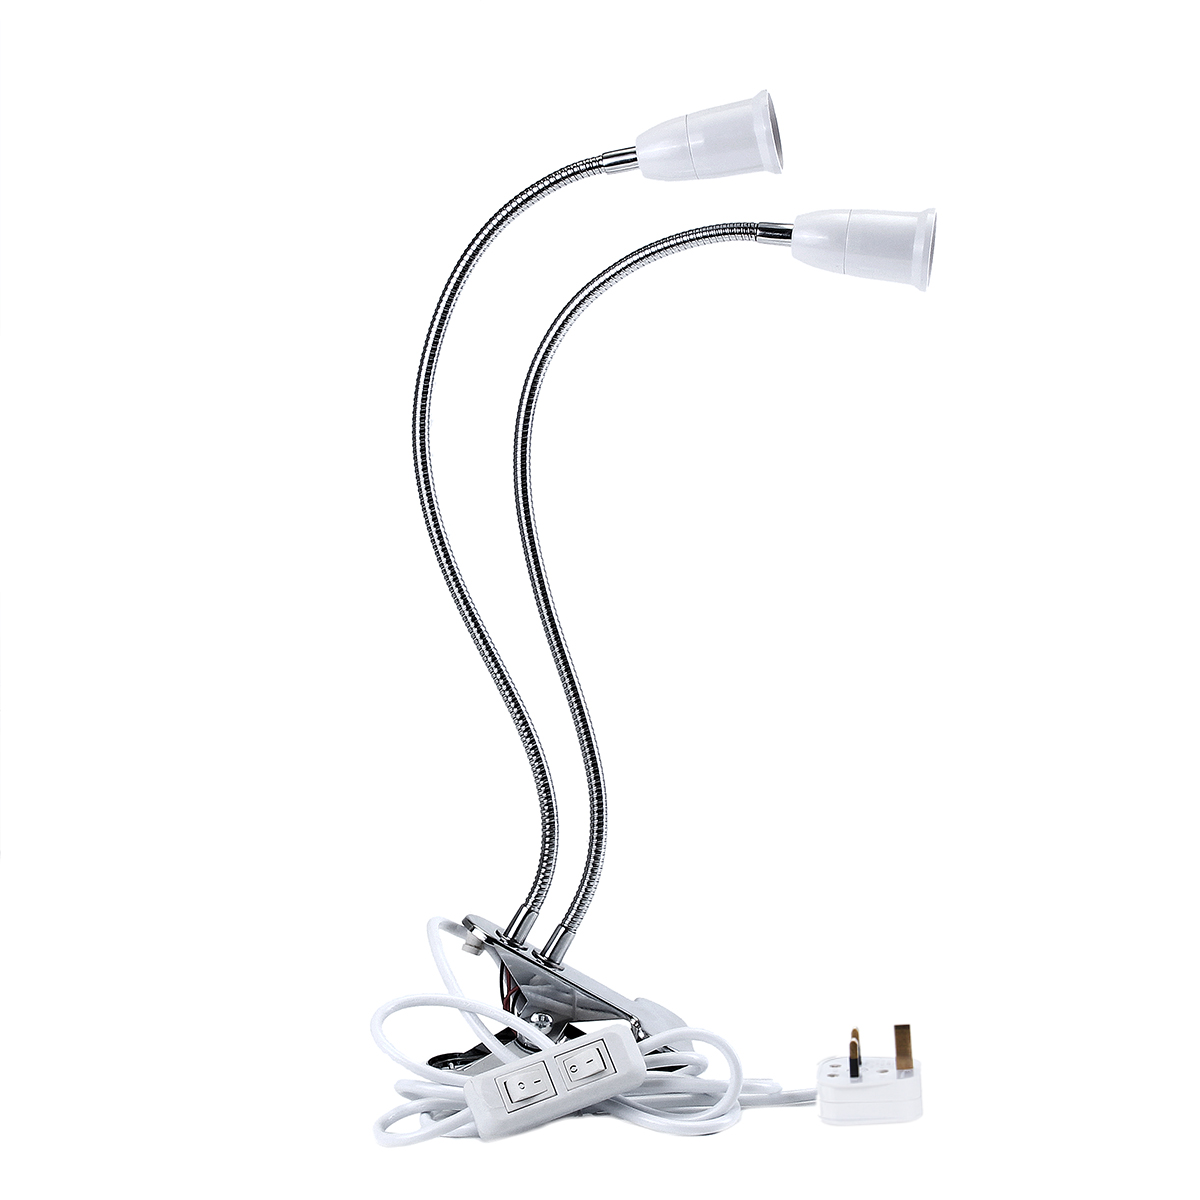 40CM-E27-Flexible-Dual-Head-Clip-Lampholder-Bulb-Adapter-with-Onoff-Switch-for-LED-Grow-Light-1291243-2